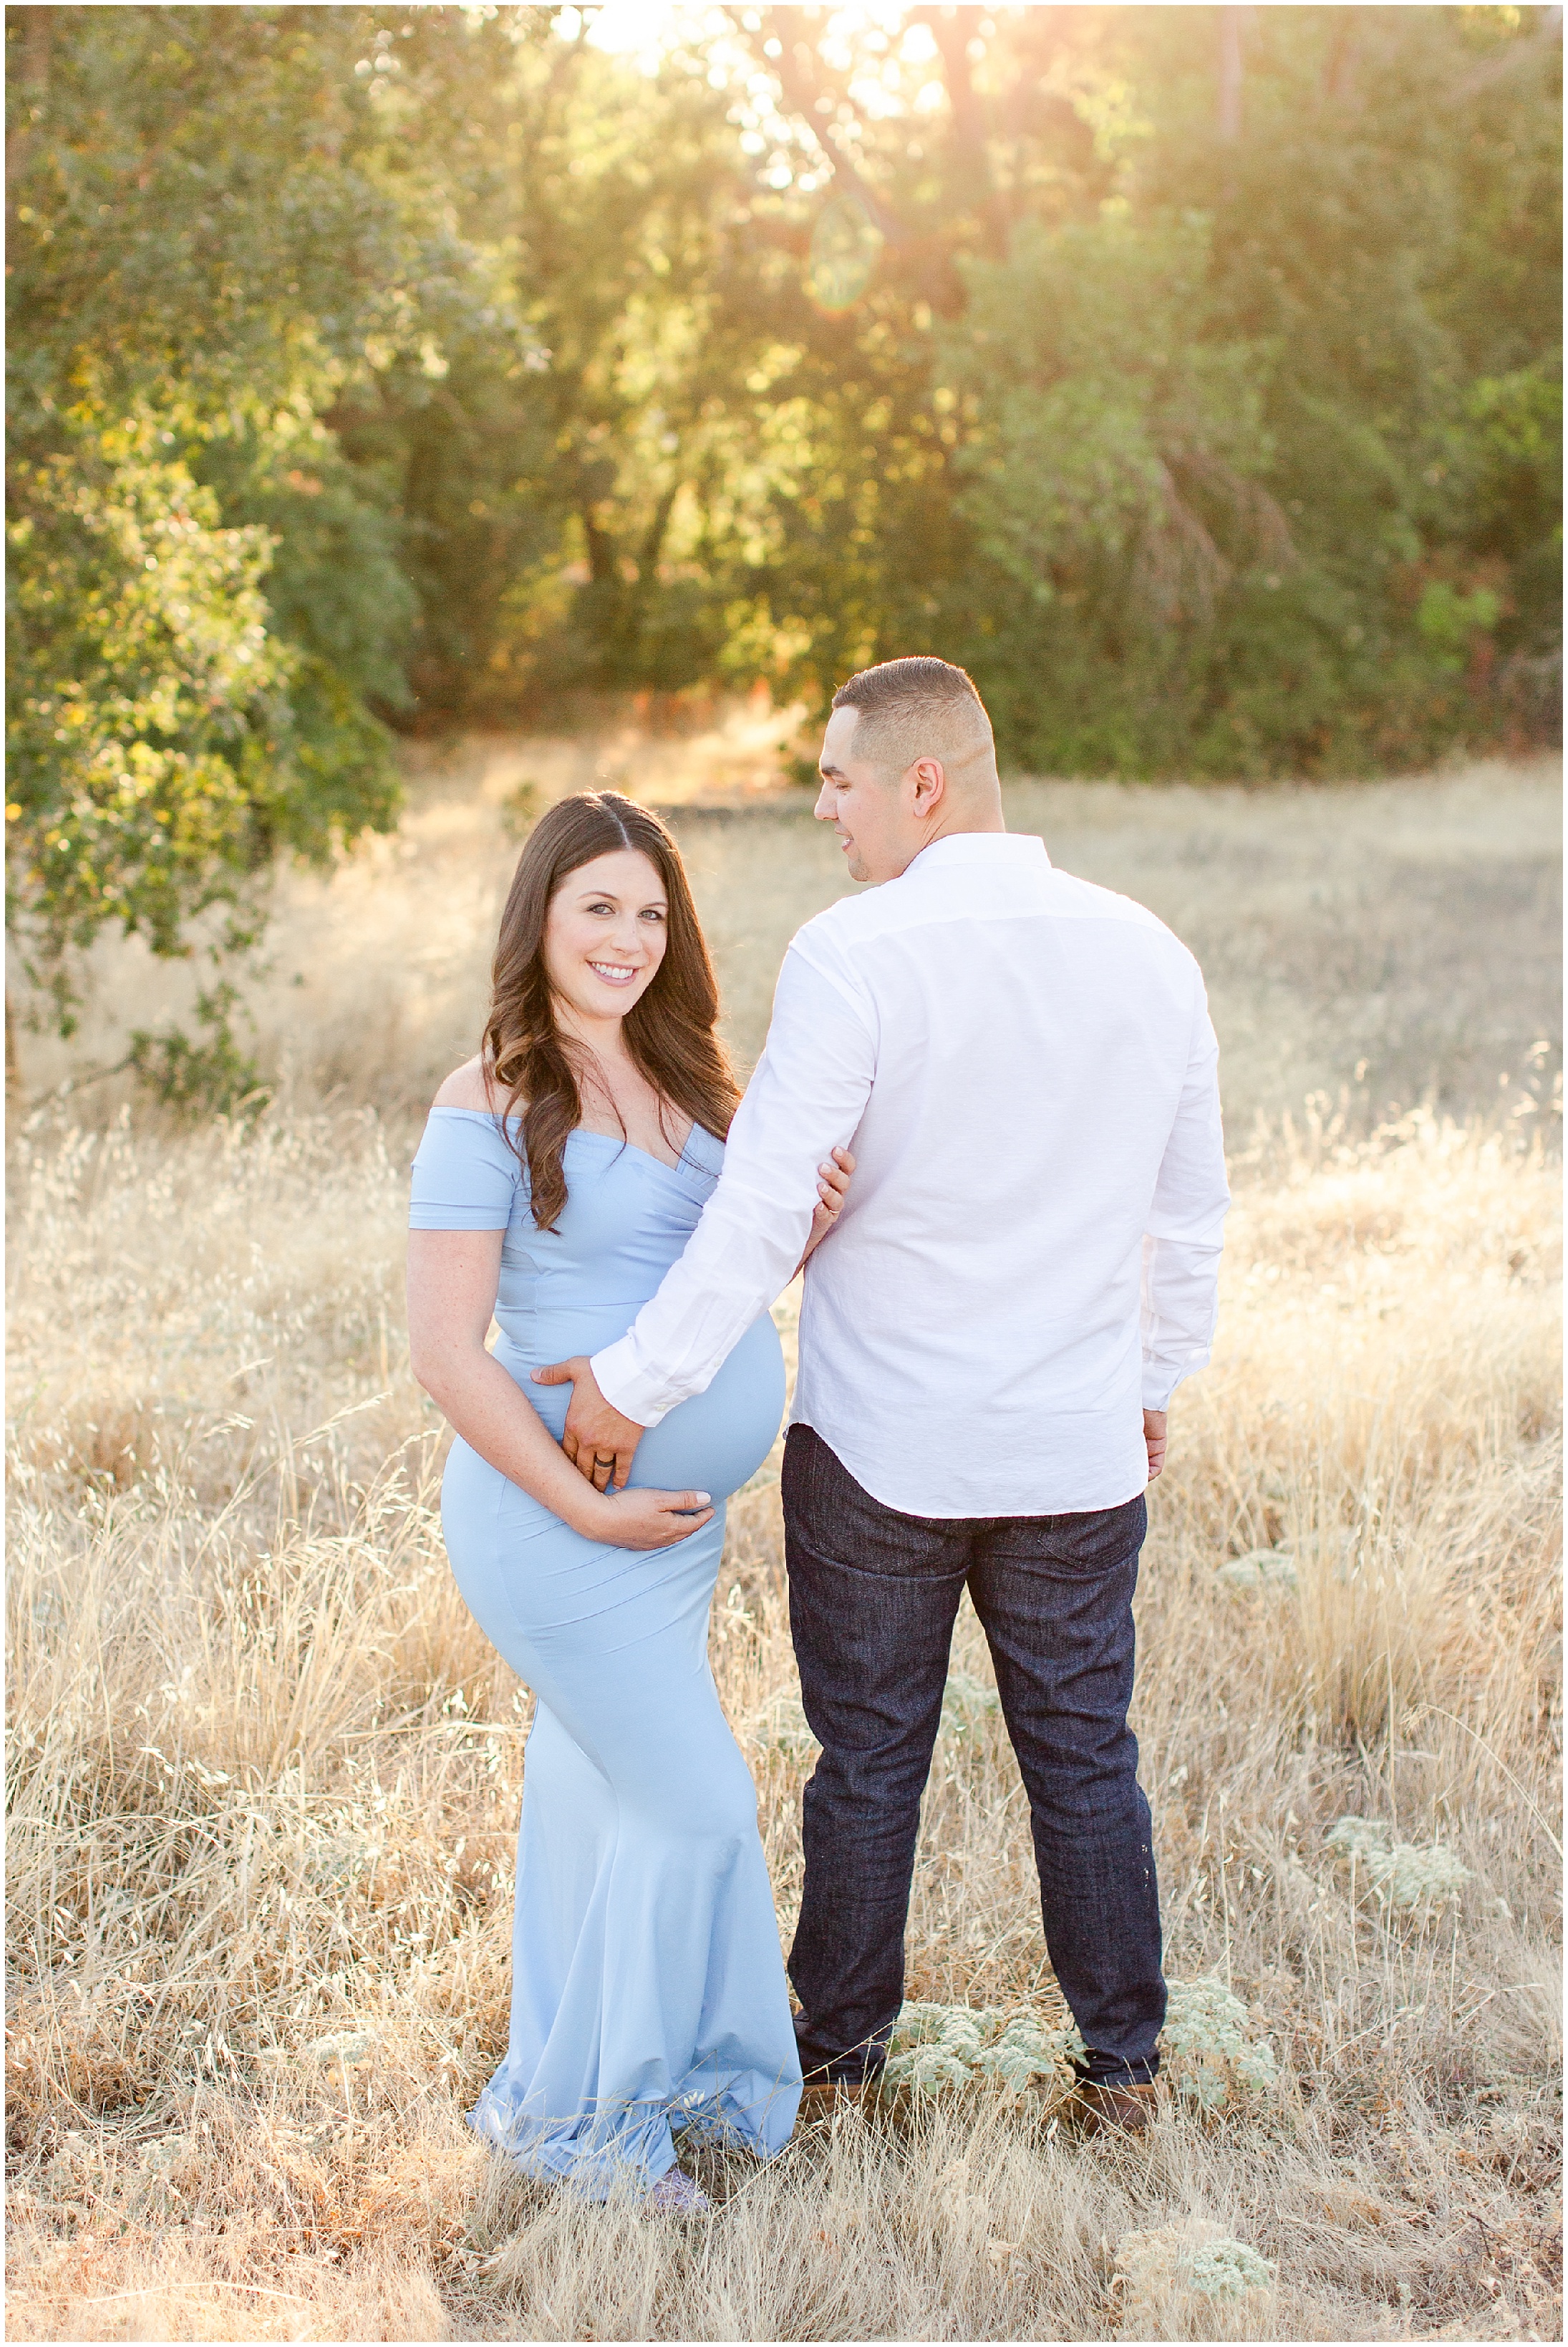 Romantic Maternity Session at Sunset in Grassy Field | Chico , CA